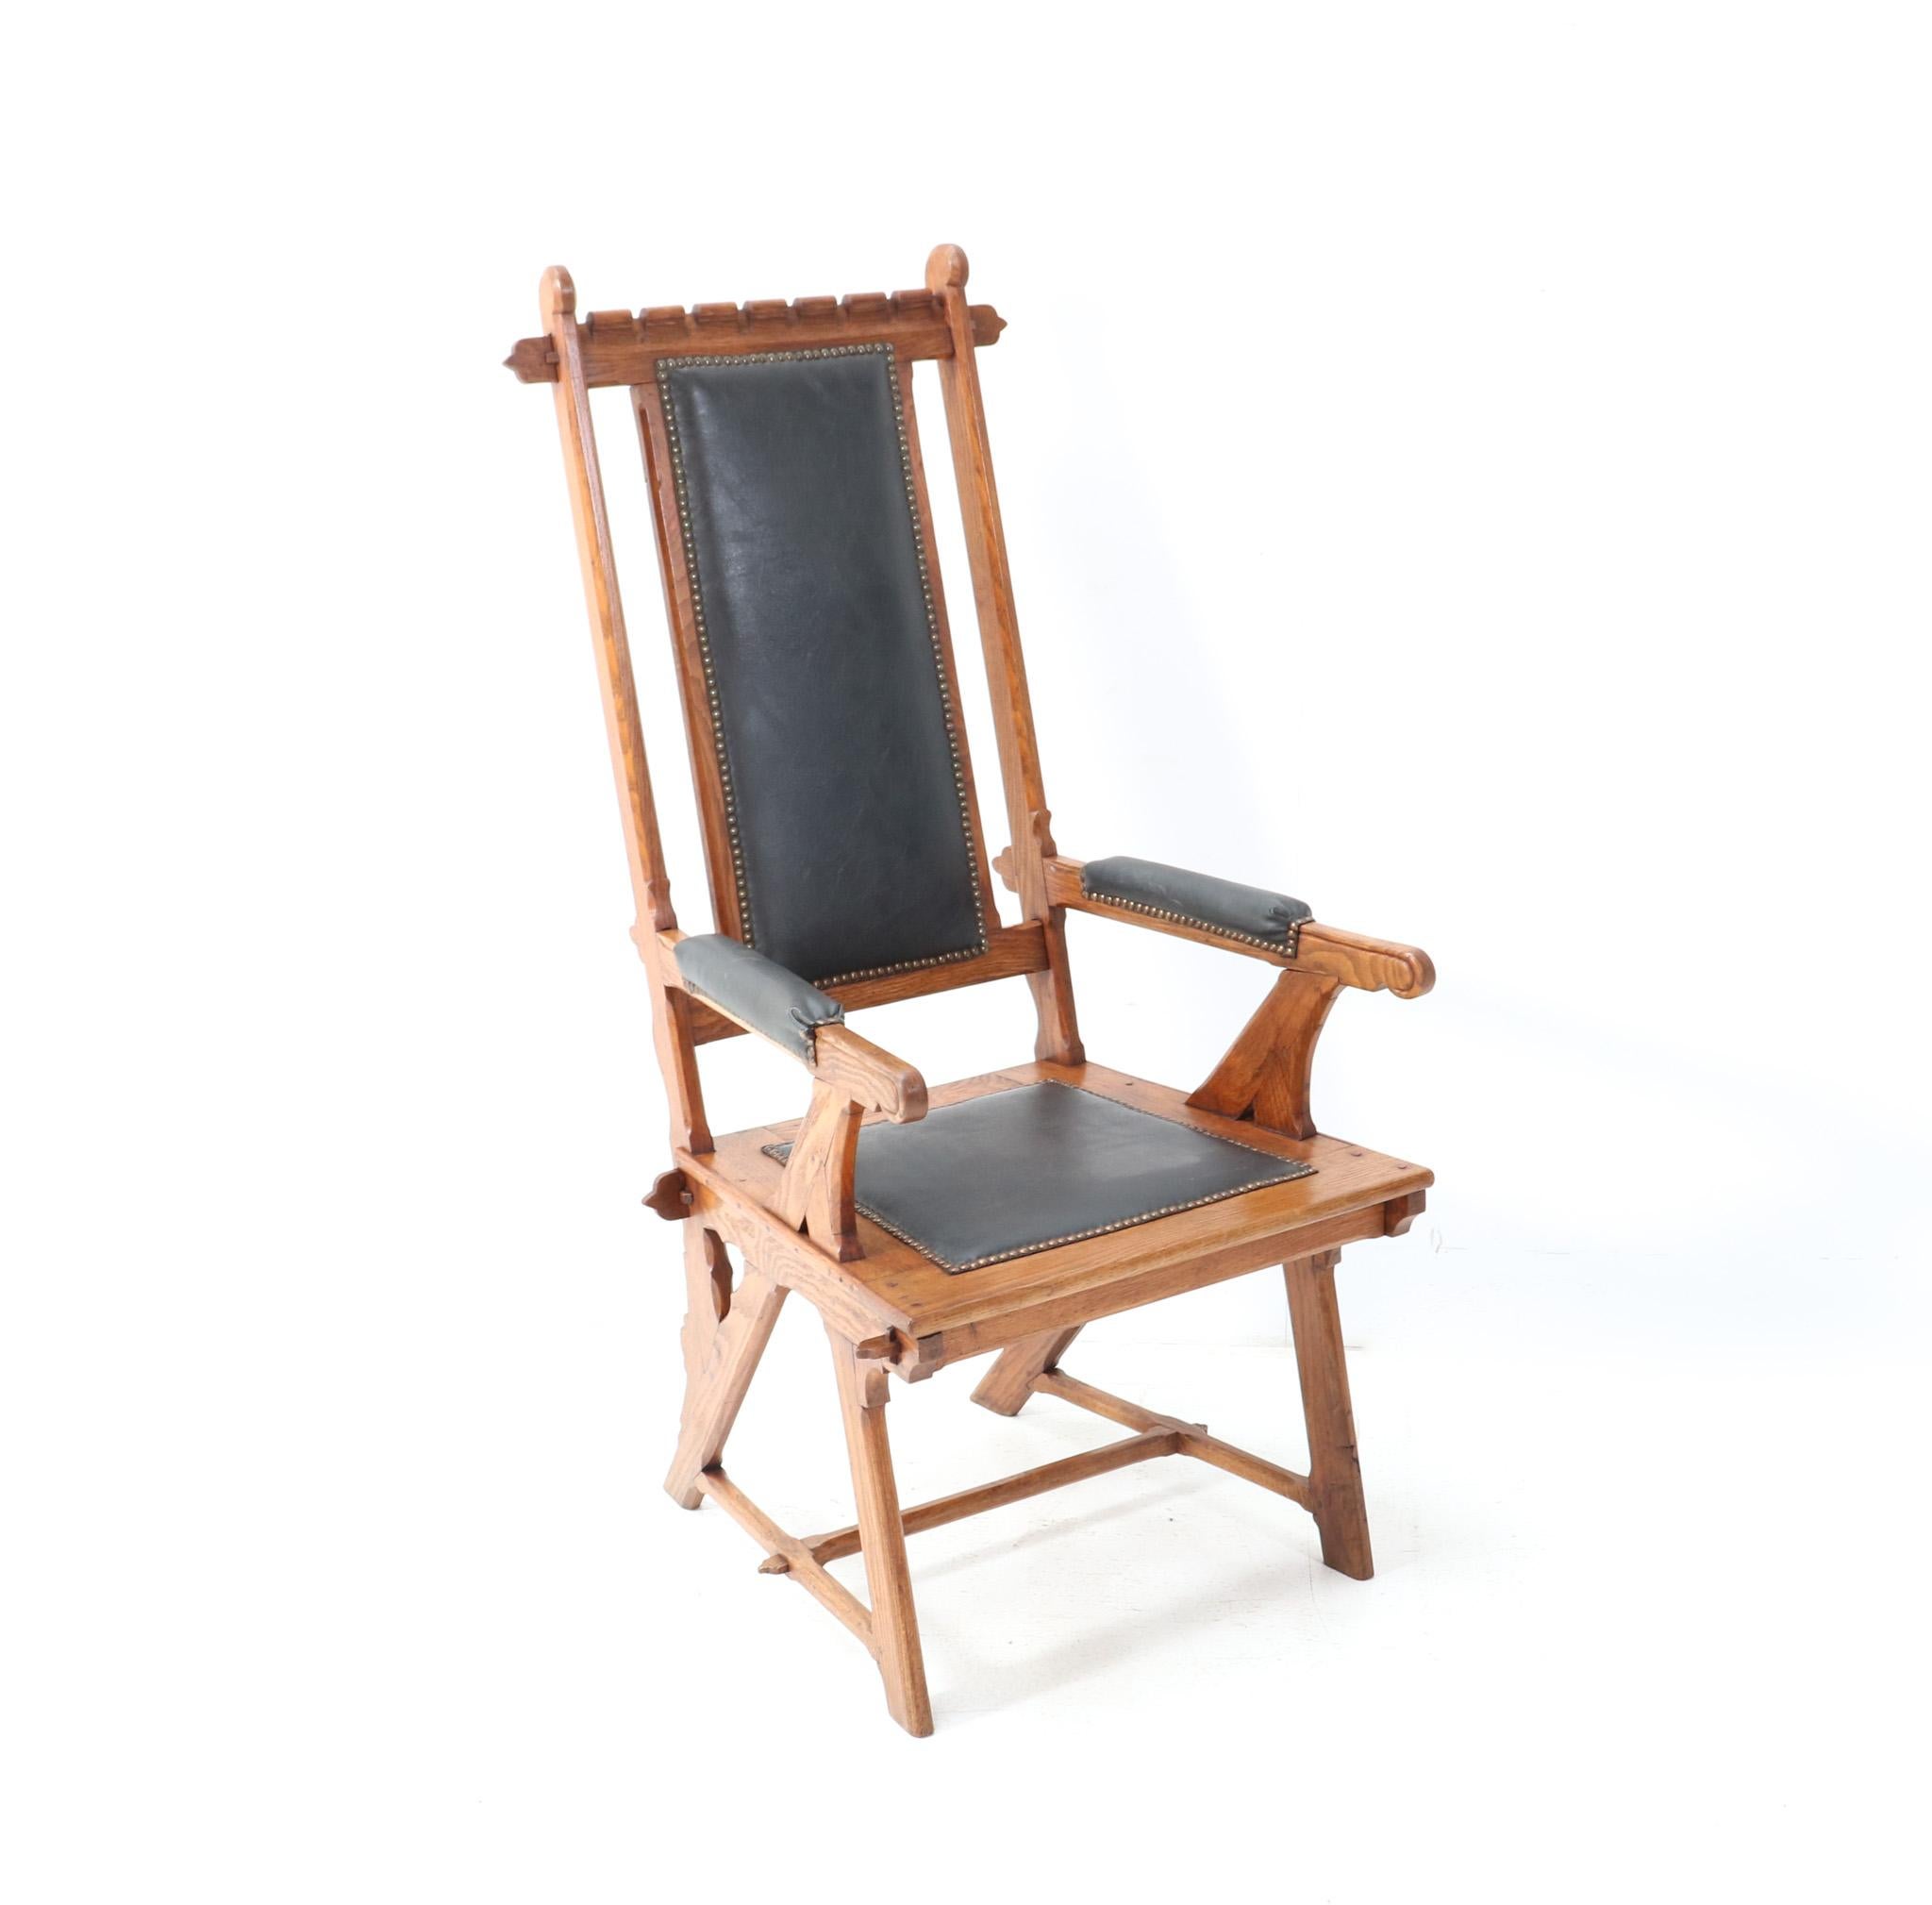 Oak Arts & Crafts Art Nouveau High Back Armchair by H.P. Berlage, 1900s In Good Condition For Sale In Amsterdam, NL